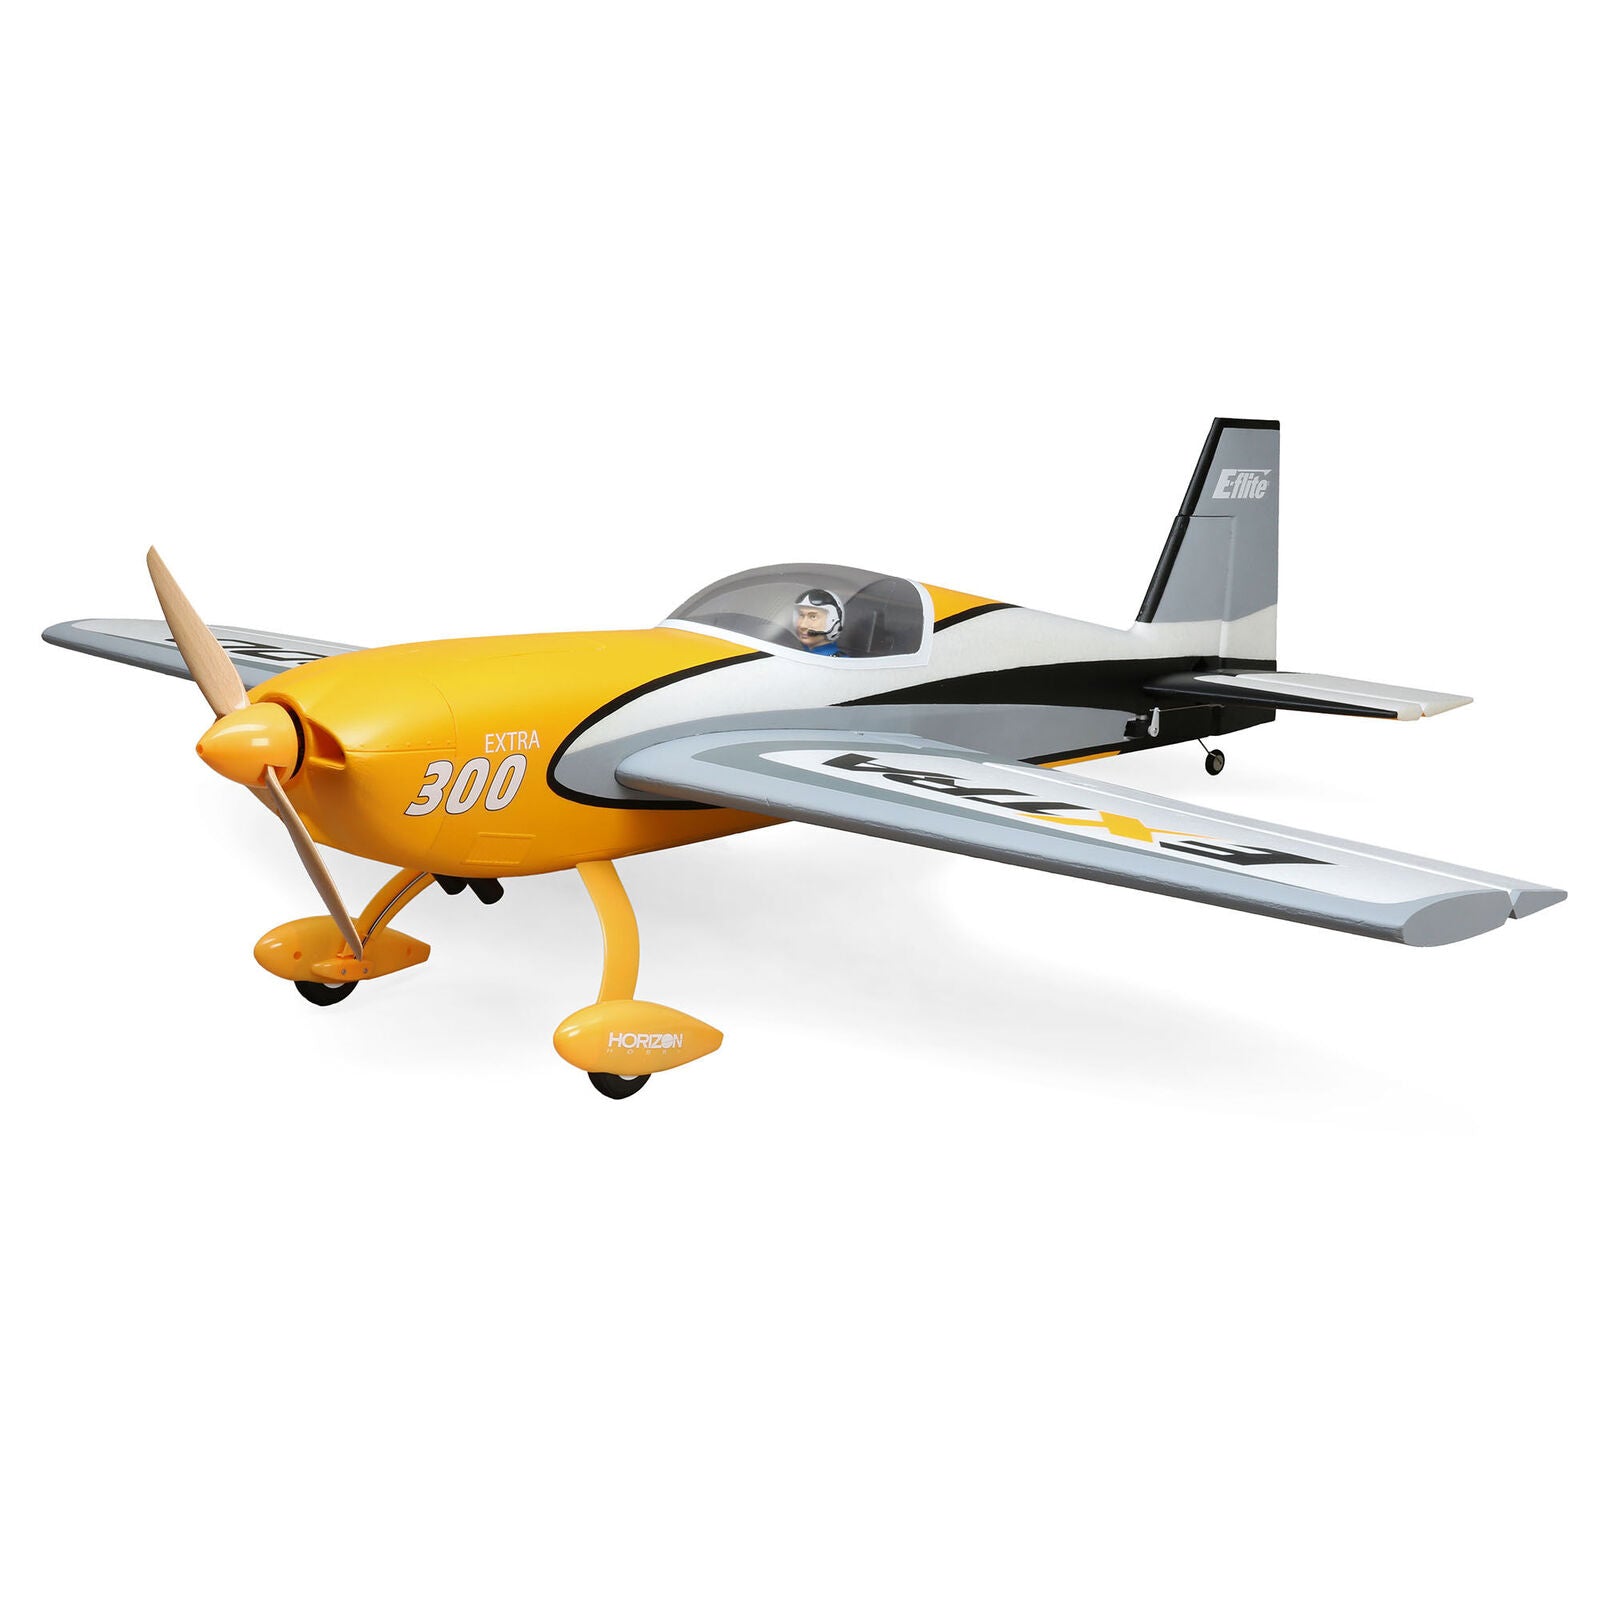 EFLITE EFL115500 Extra 300 3D 1.3m BNF Basic with AS3X and SAFE Select